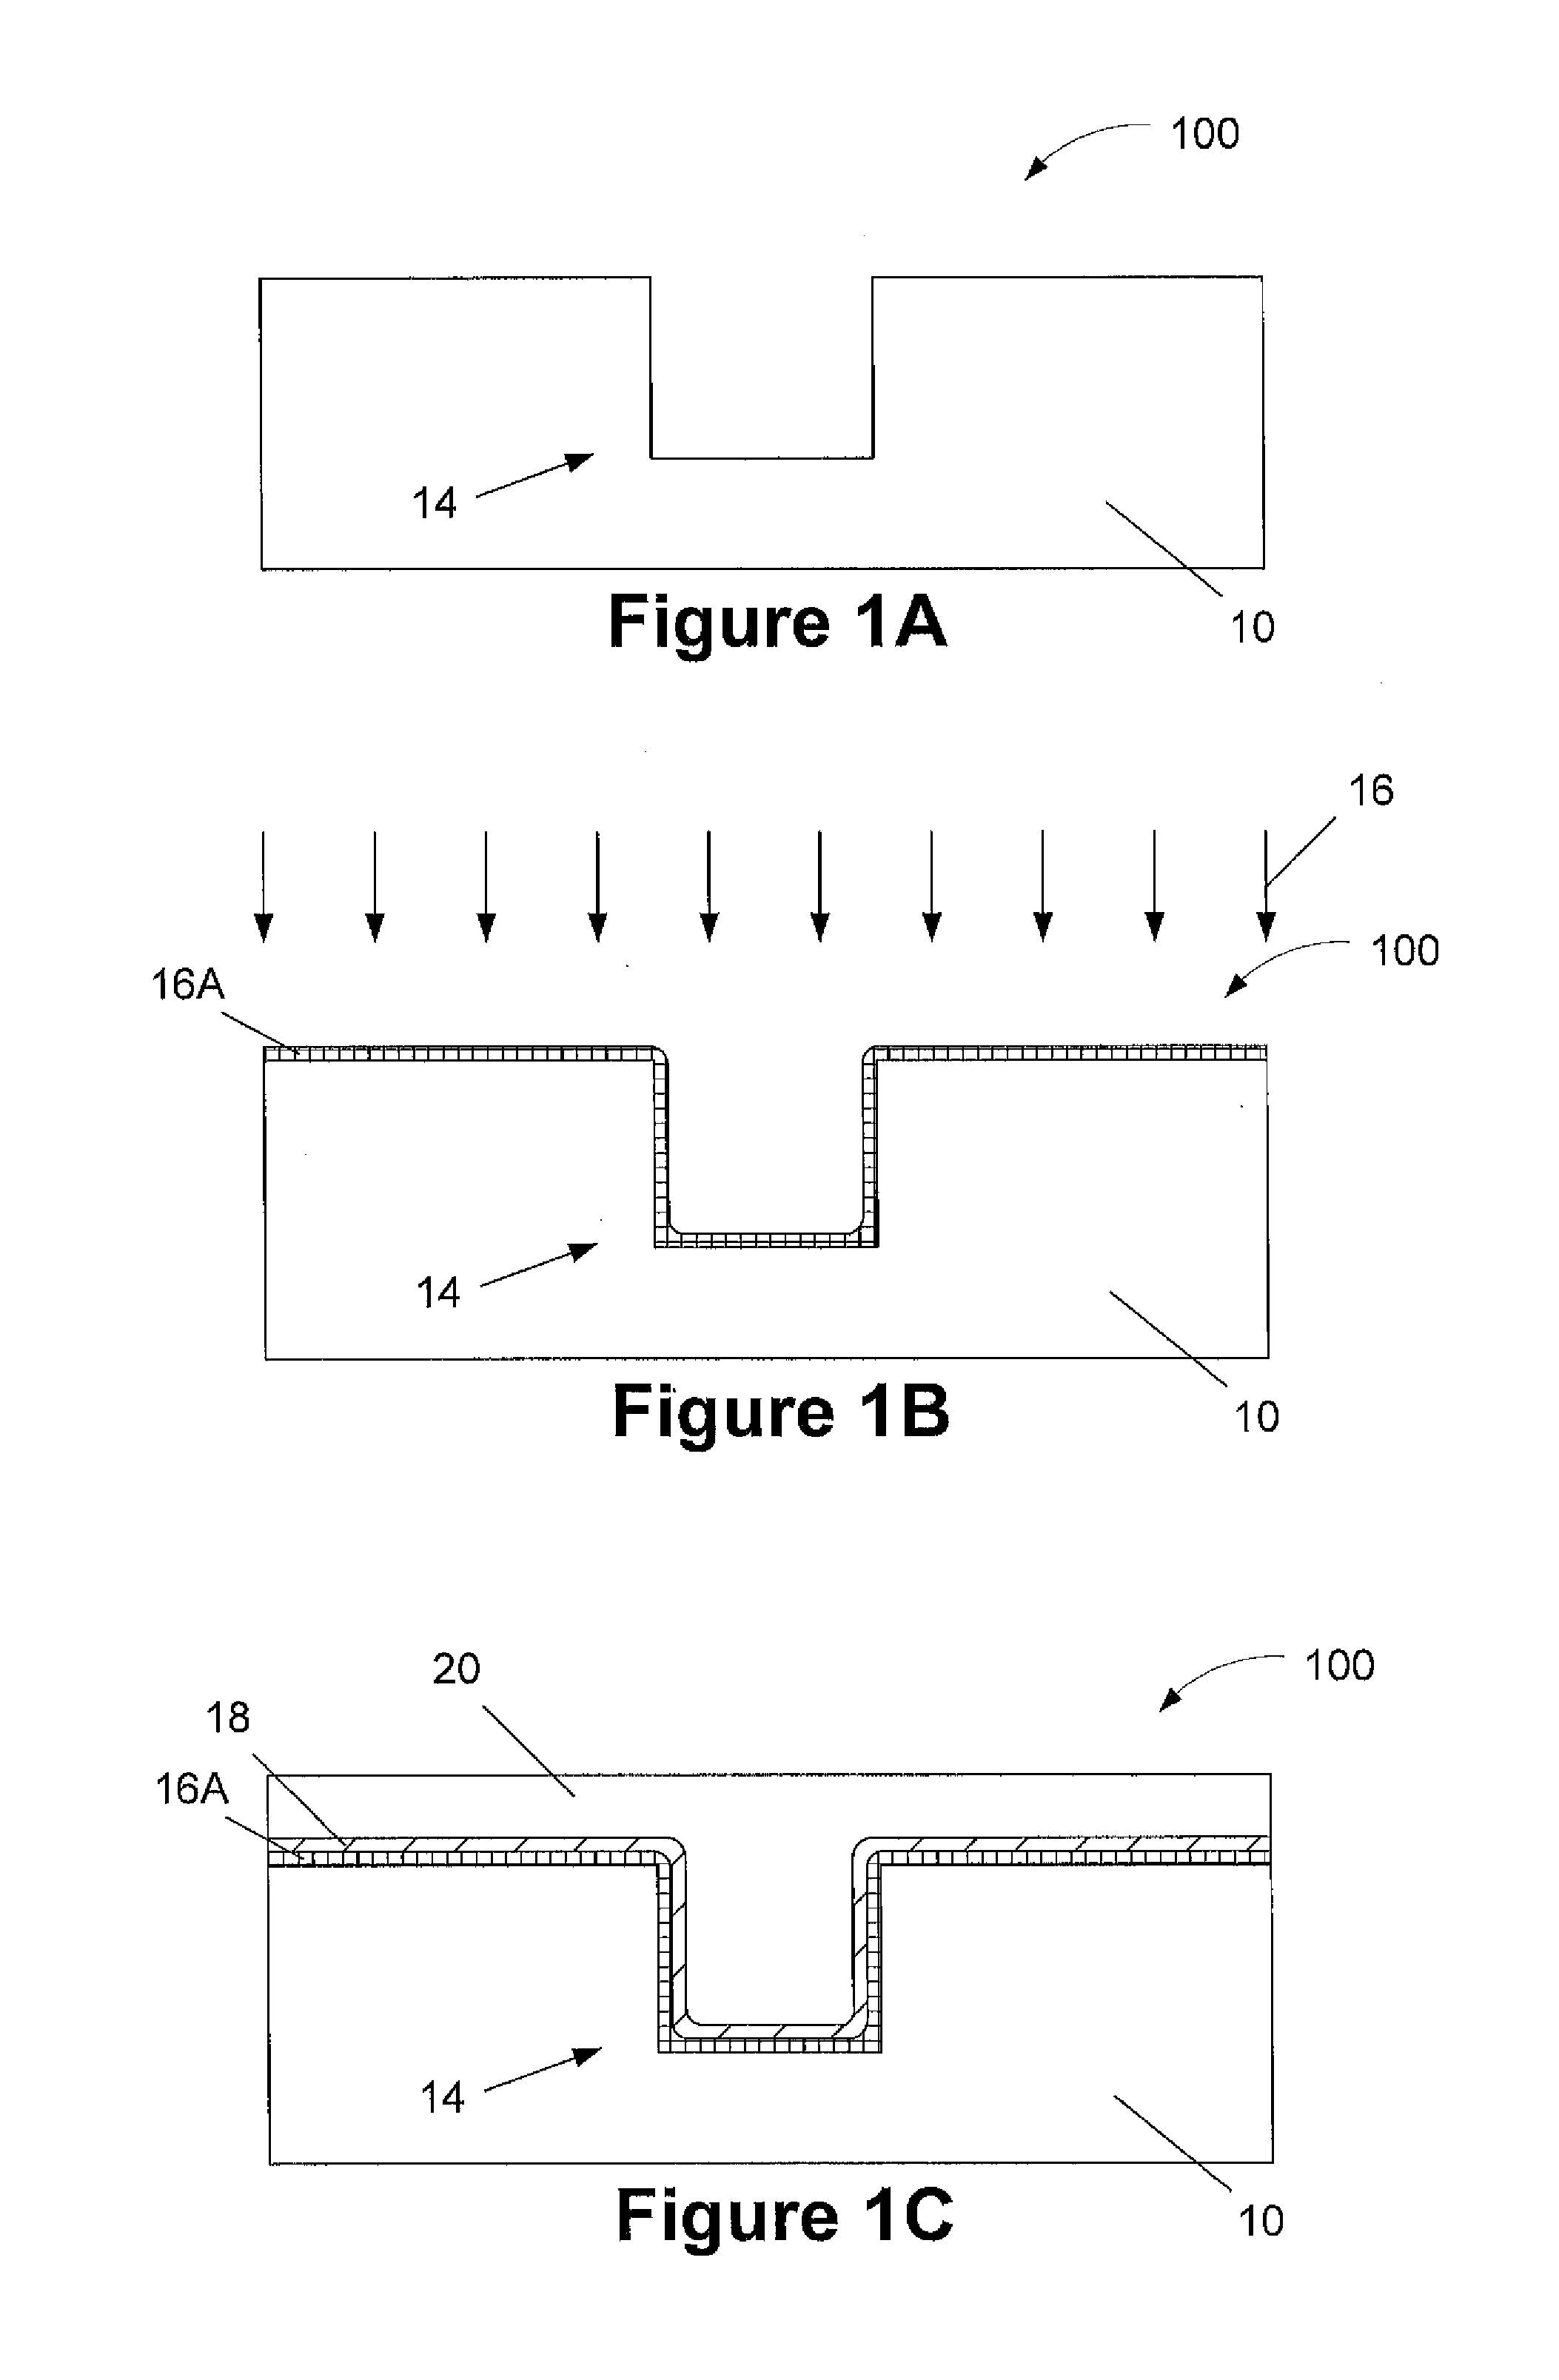 Methods of forming graphene liners and/or cap layers on copper-based conductive structures